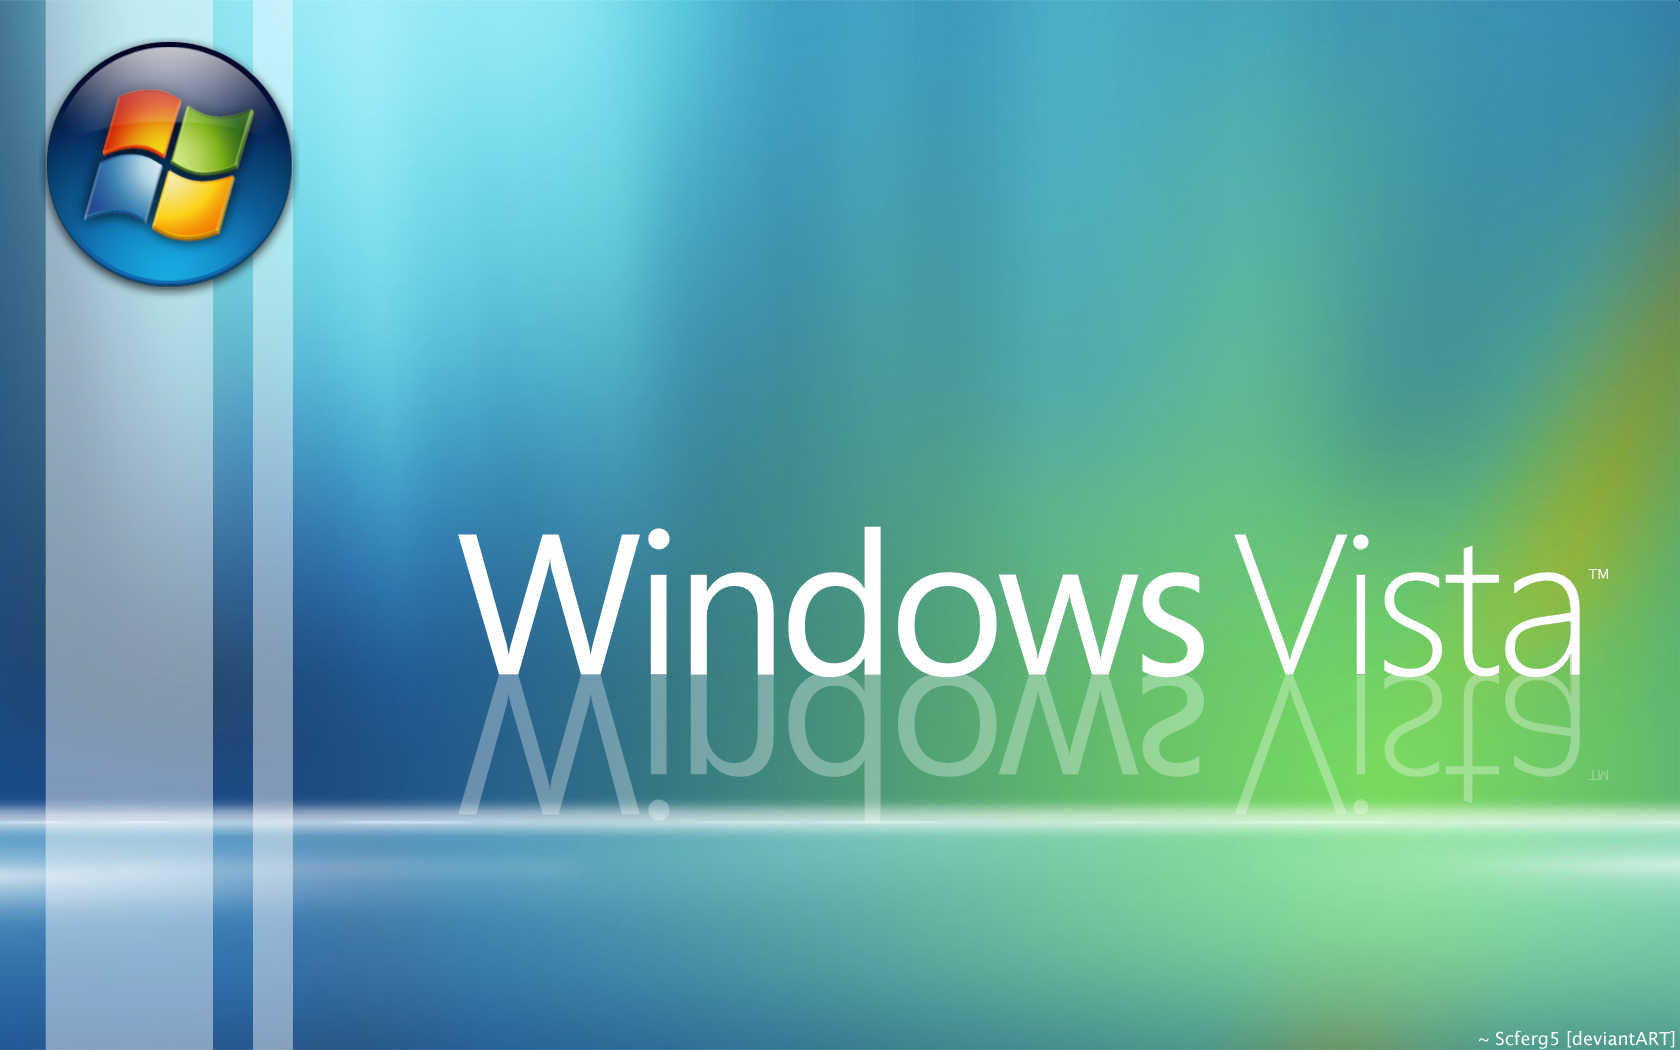 And Android S Windows Vista Wallpaper Widescreen